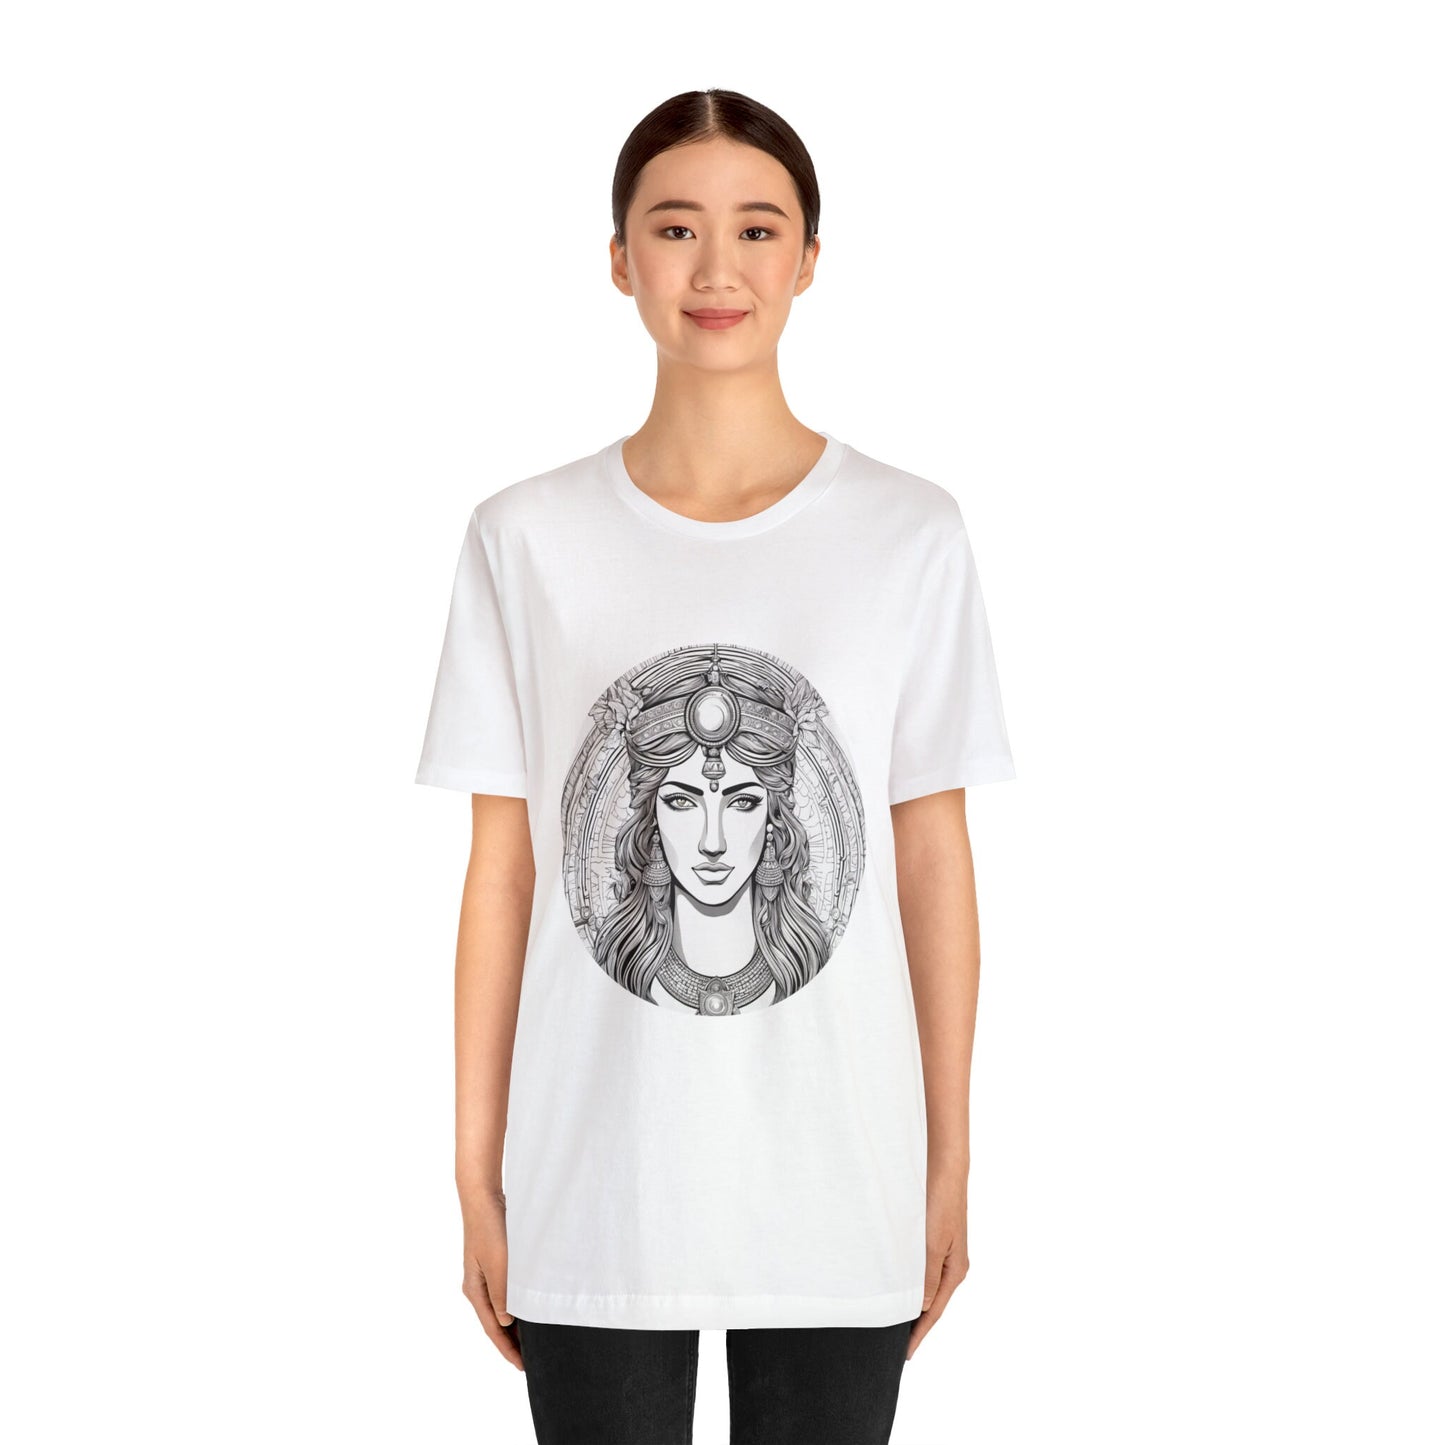 Artemis Tattoo Short Sleeve Tee Perfect Gift for Men and Women